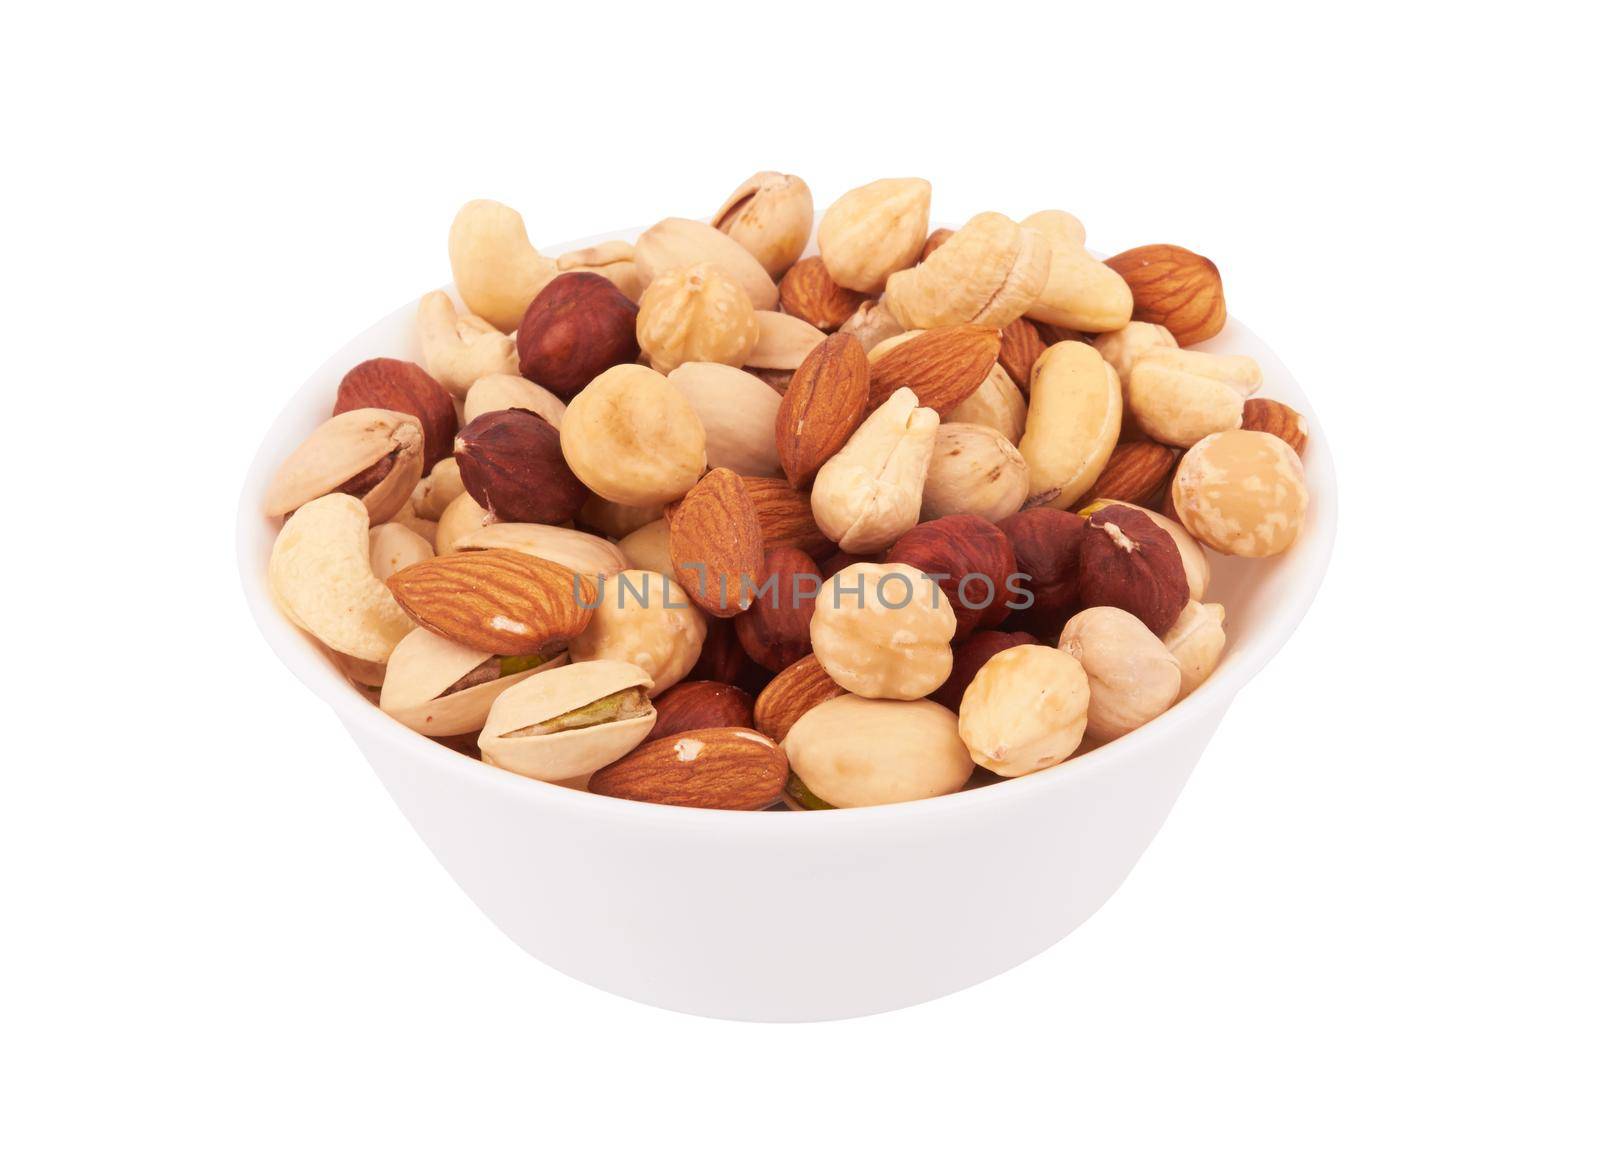 Heap of mixed nuts in bowl isolated on white background